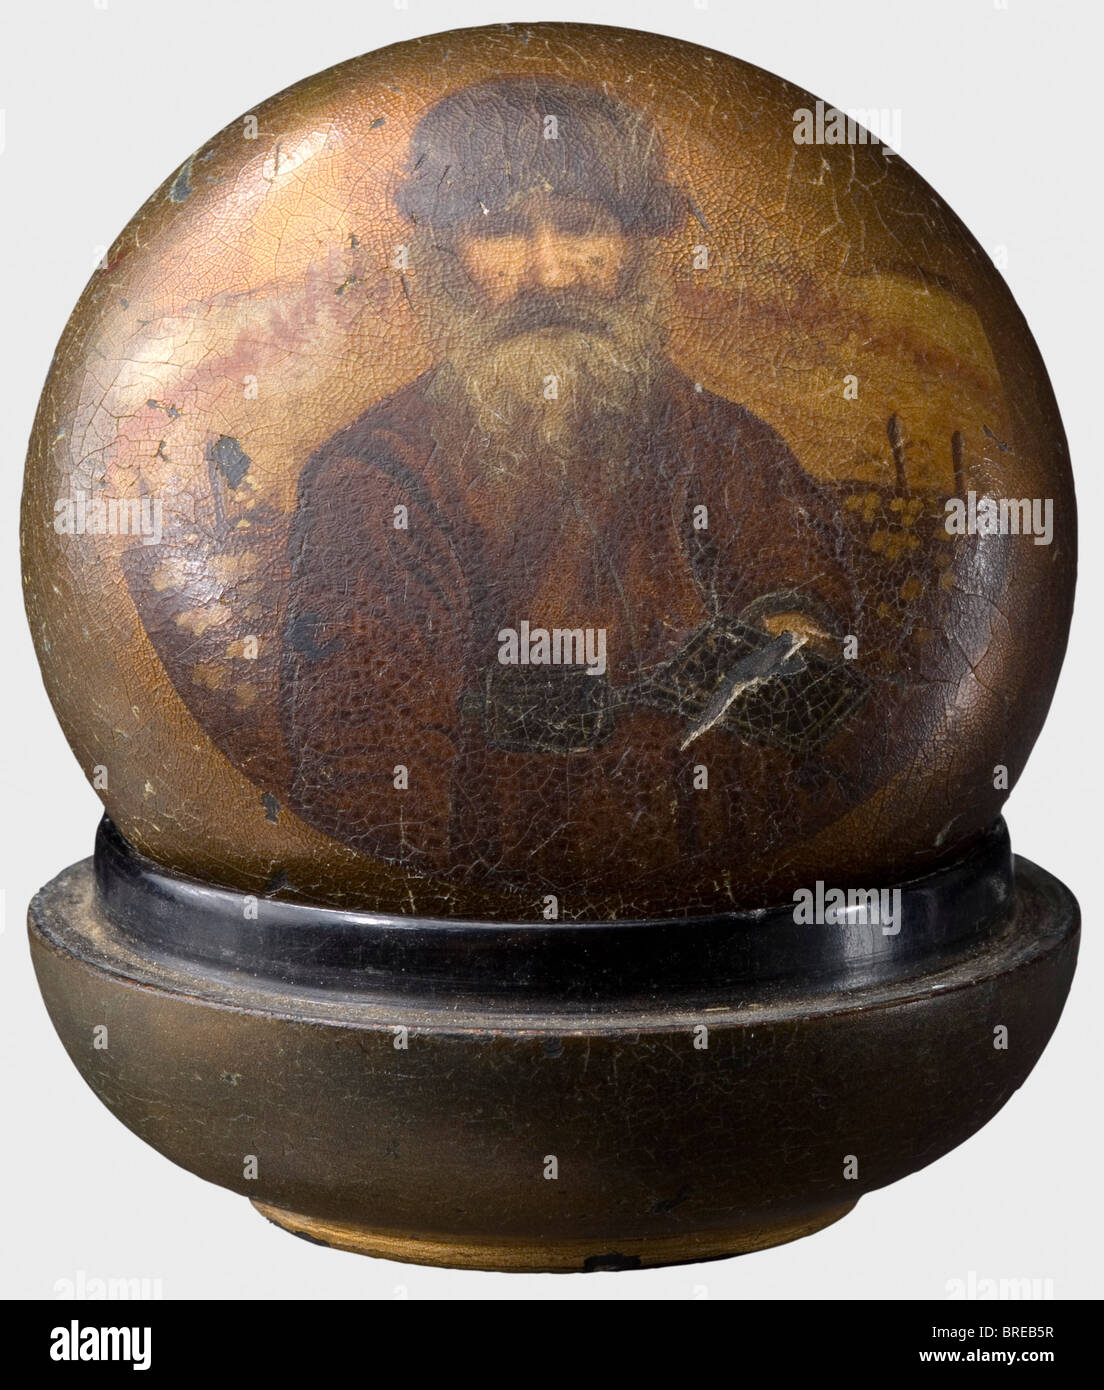 A small lacquered case bearing the portrait of a peasant, Court Purveyor Lukutin, Moscow Black and gold lacquer. Maker's signature, 'Lukutin' under a Russian double eagle inside the lid. Diameter 6 cm. Provenance: Grand Duchess Vera Konstantinovna Romanova (1854 - 1912). historic, historical, people, 19th century, vessel, vessels, object, objects, stills, clipping, clippings, cut out, cut-out, cut-outs, Stock Photo